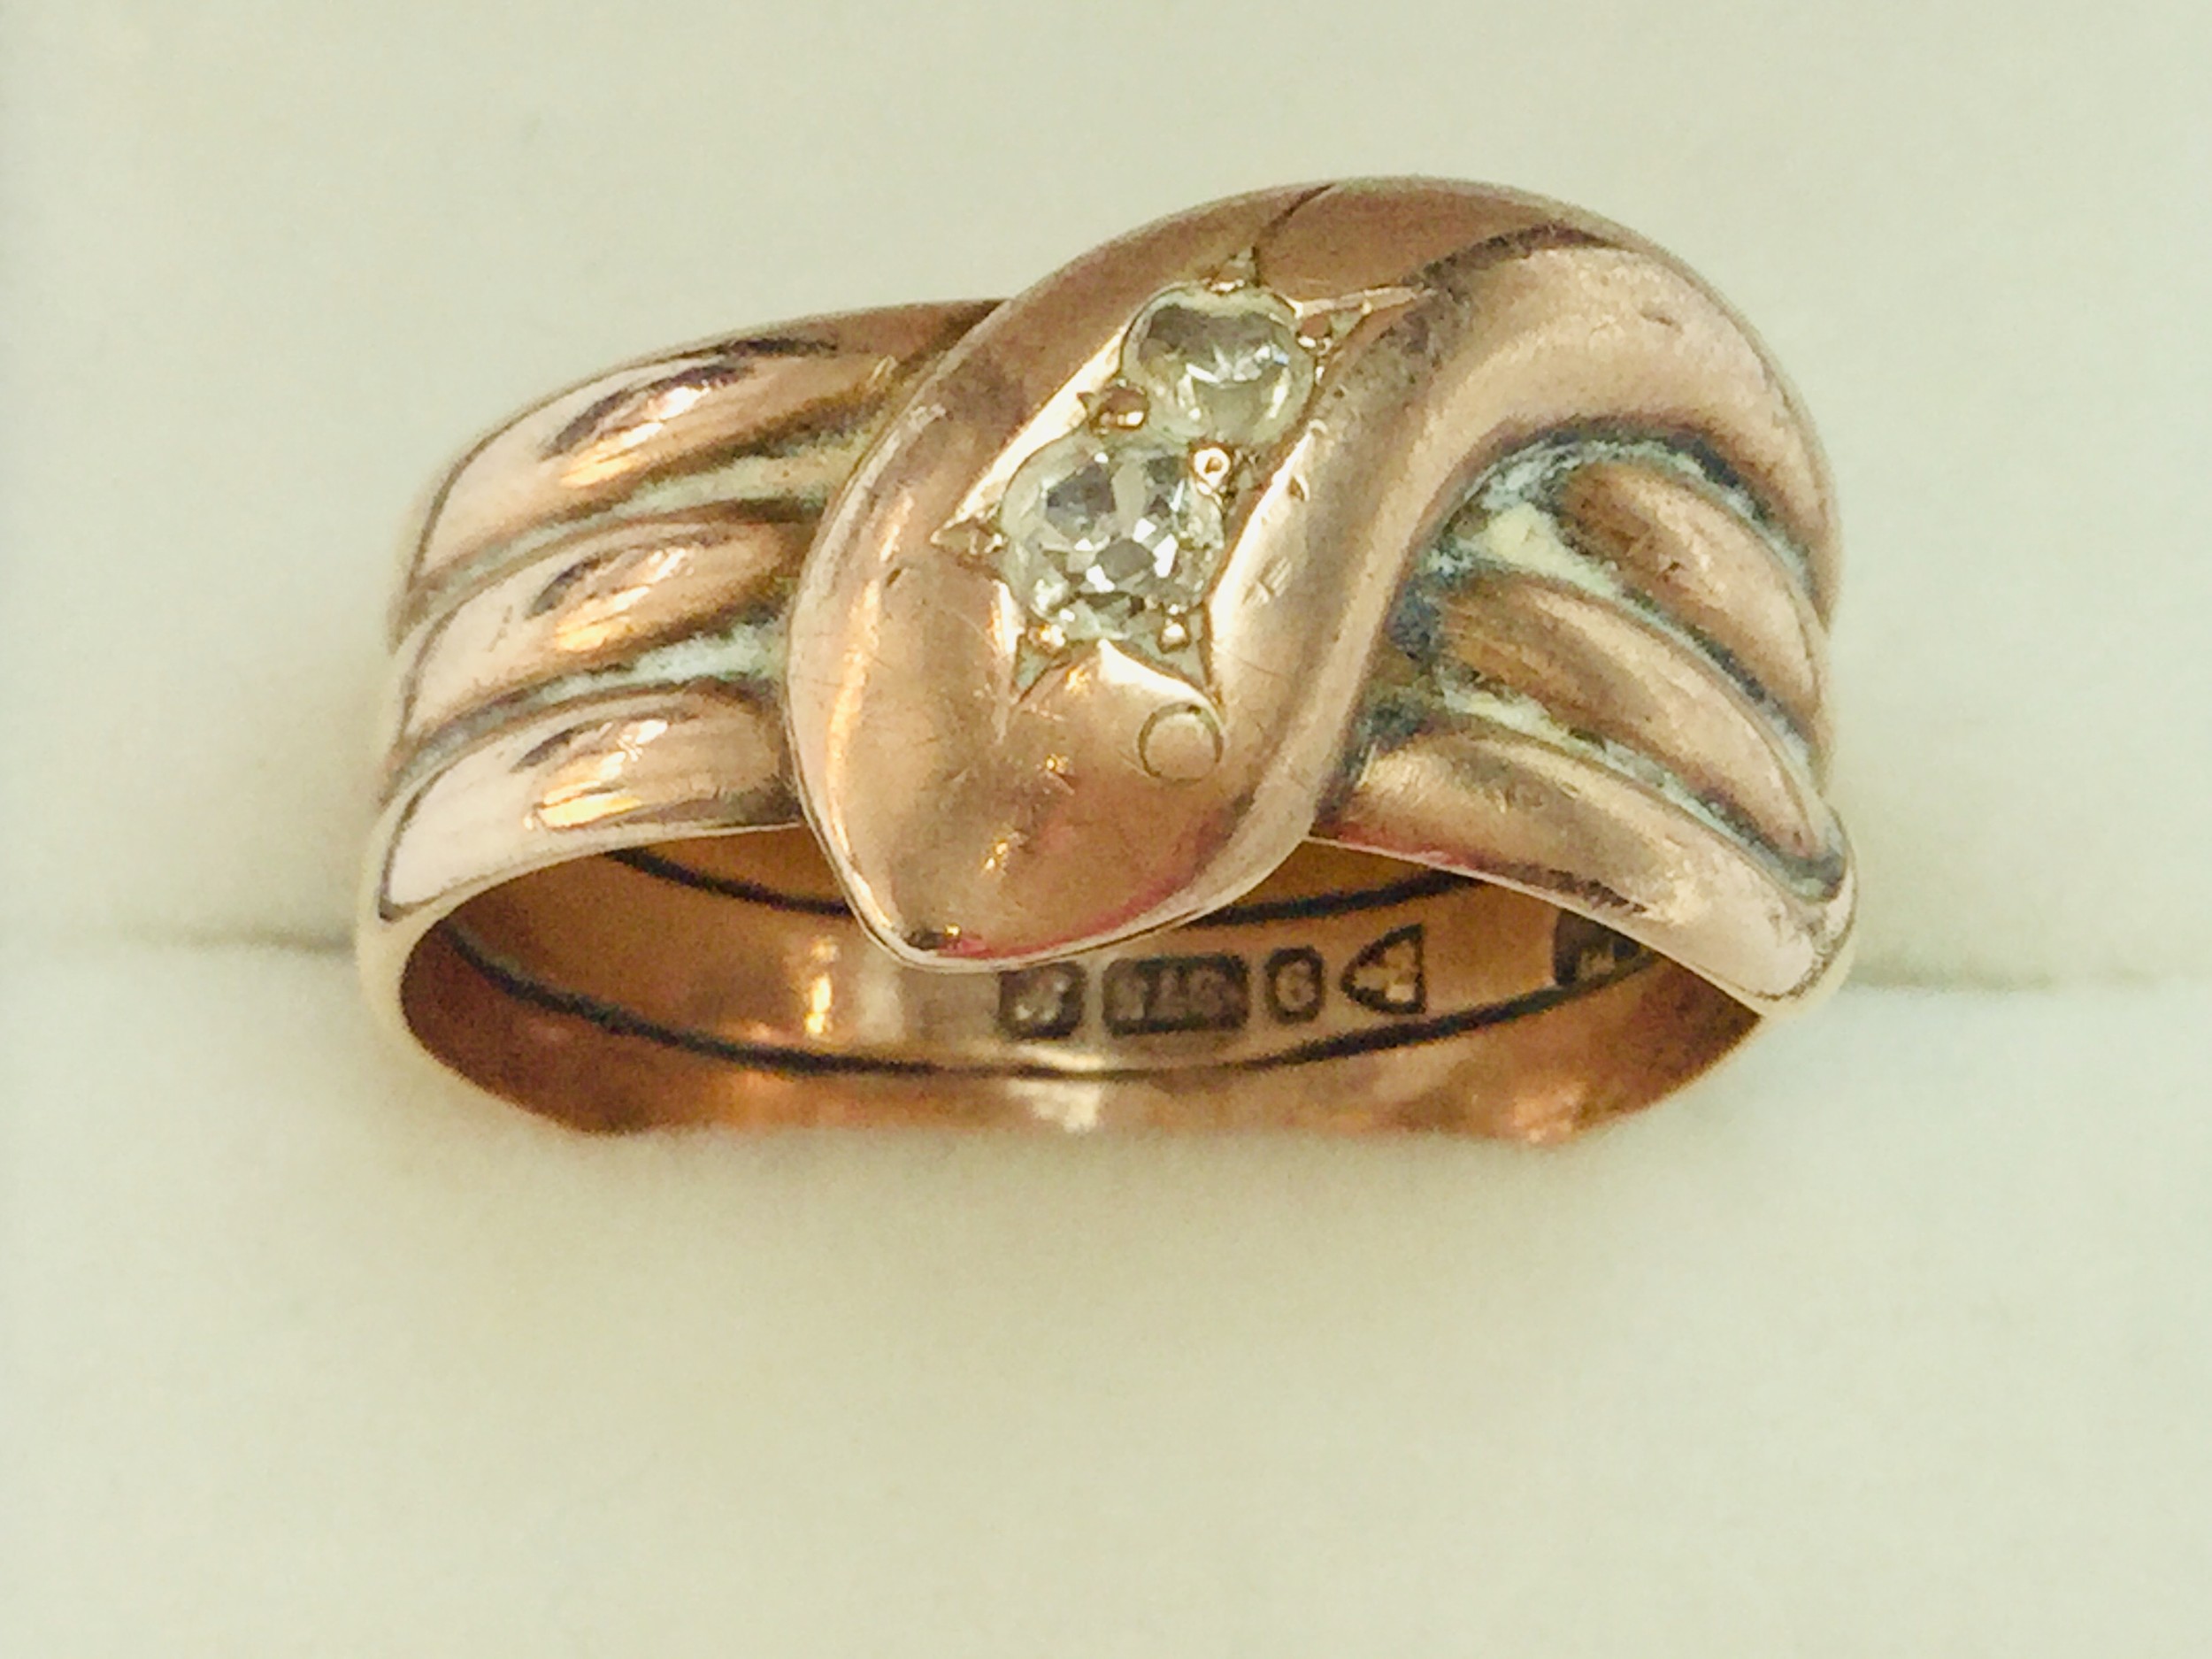 A gents 9ct gold dress ring shaped as a snake with rose cut diamonds for eyes, finger size W, - Image 3 of 4